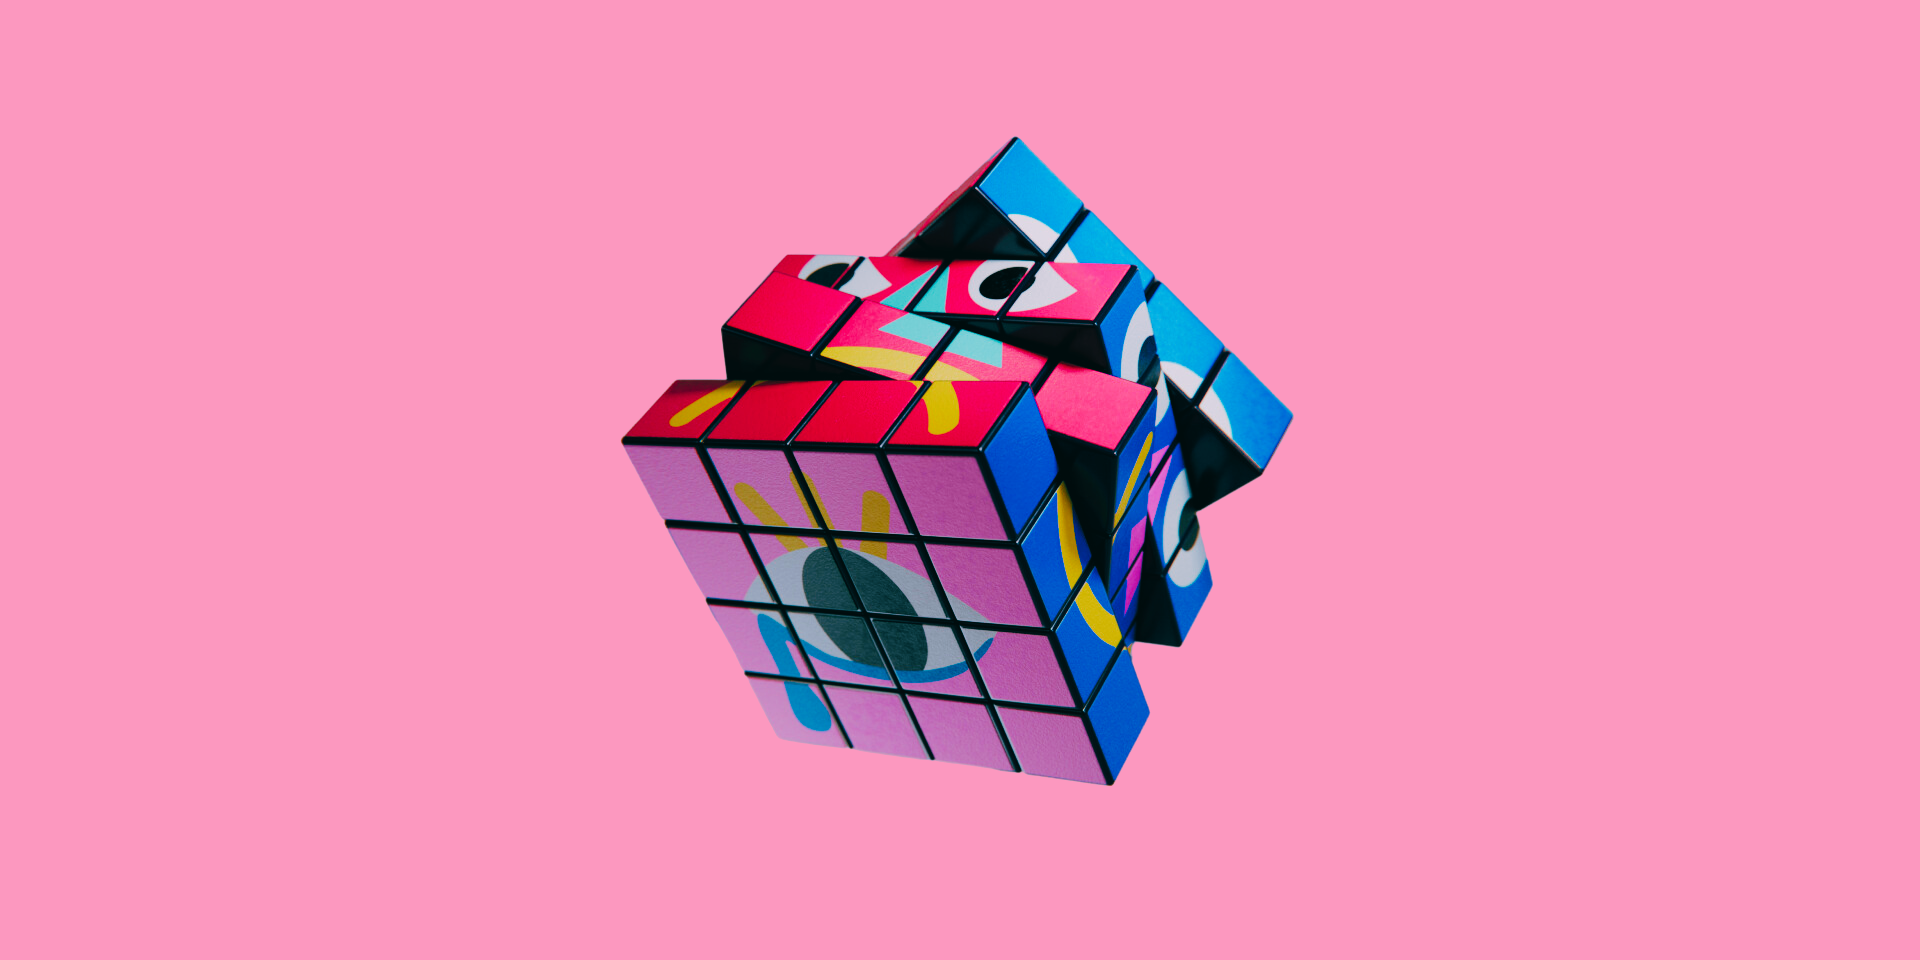 Colorful, illlustrated, Rubik's cube-like object